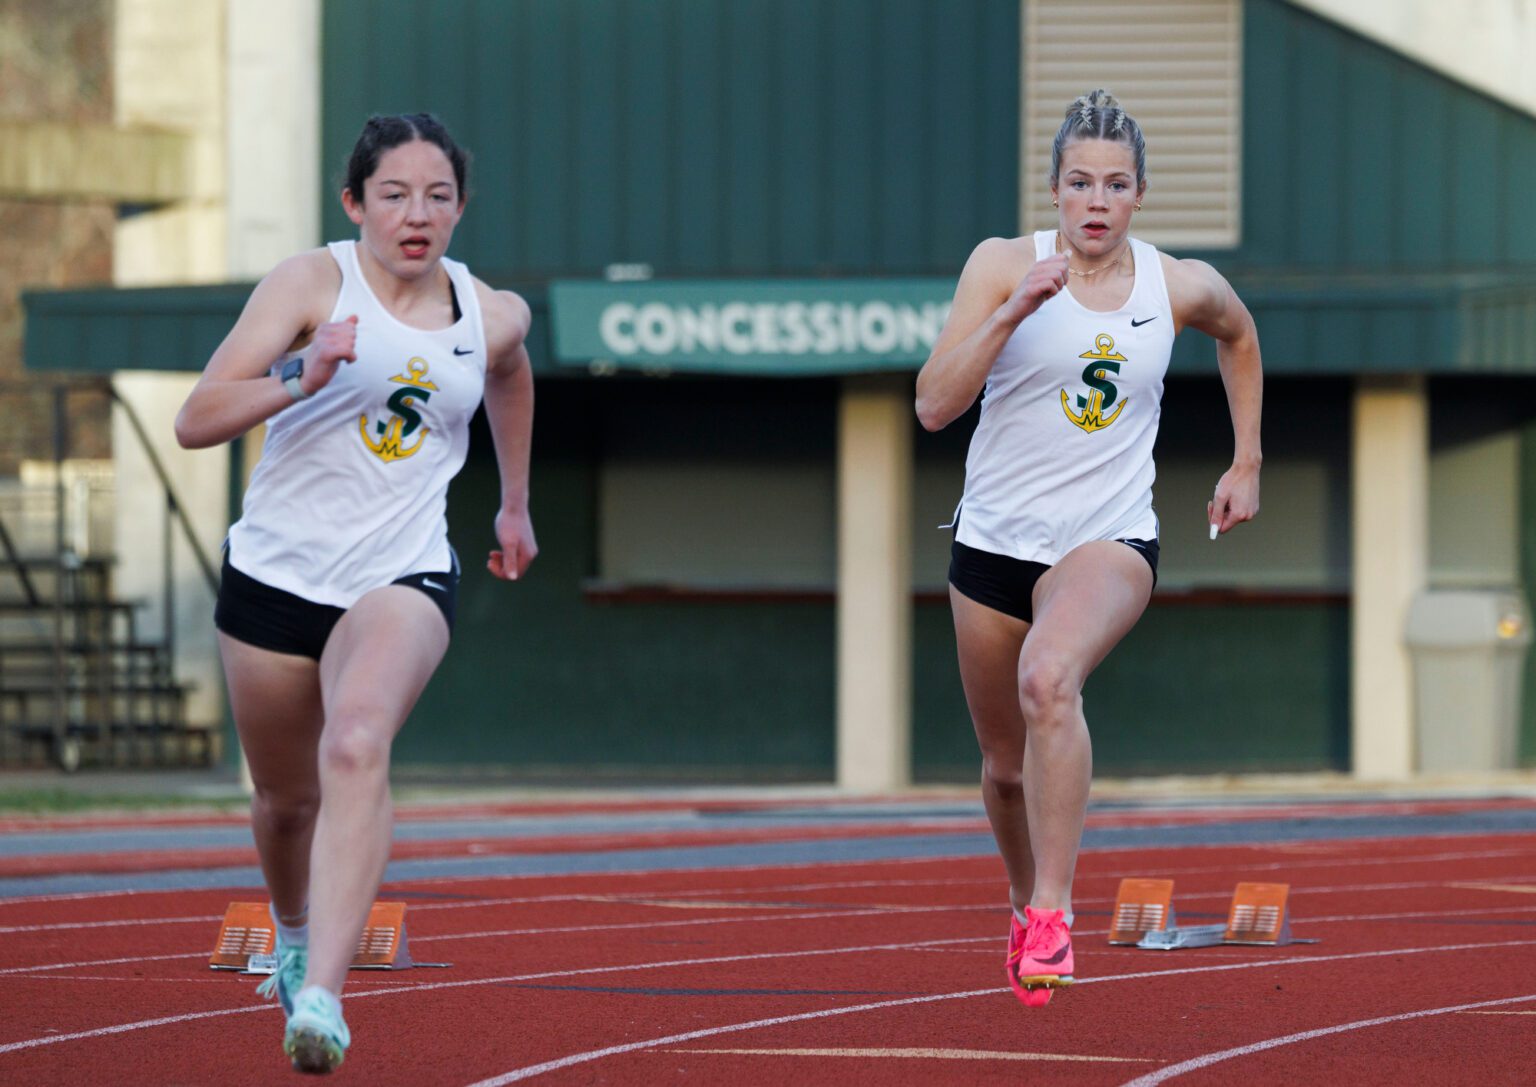 Sehome’s Tryia Mitchell, right, and teammate Keira Reeves take off from the starting blocks in the girls 200-meter dash Wednesday, March 13 during a tri-meet with Sehome and Squalicum at Civic Stadium.